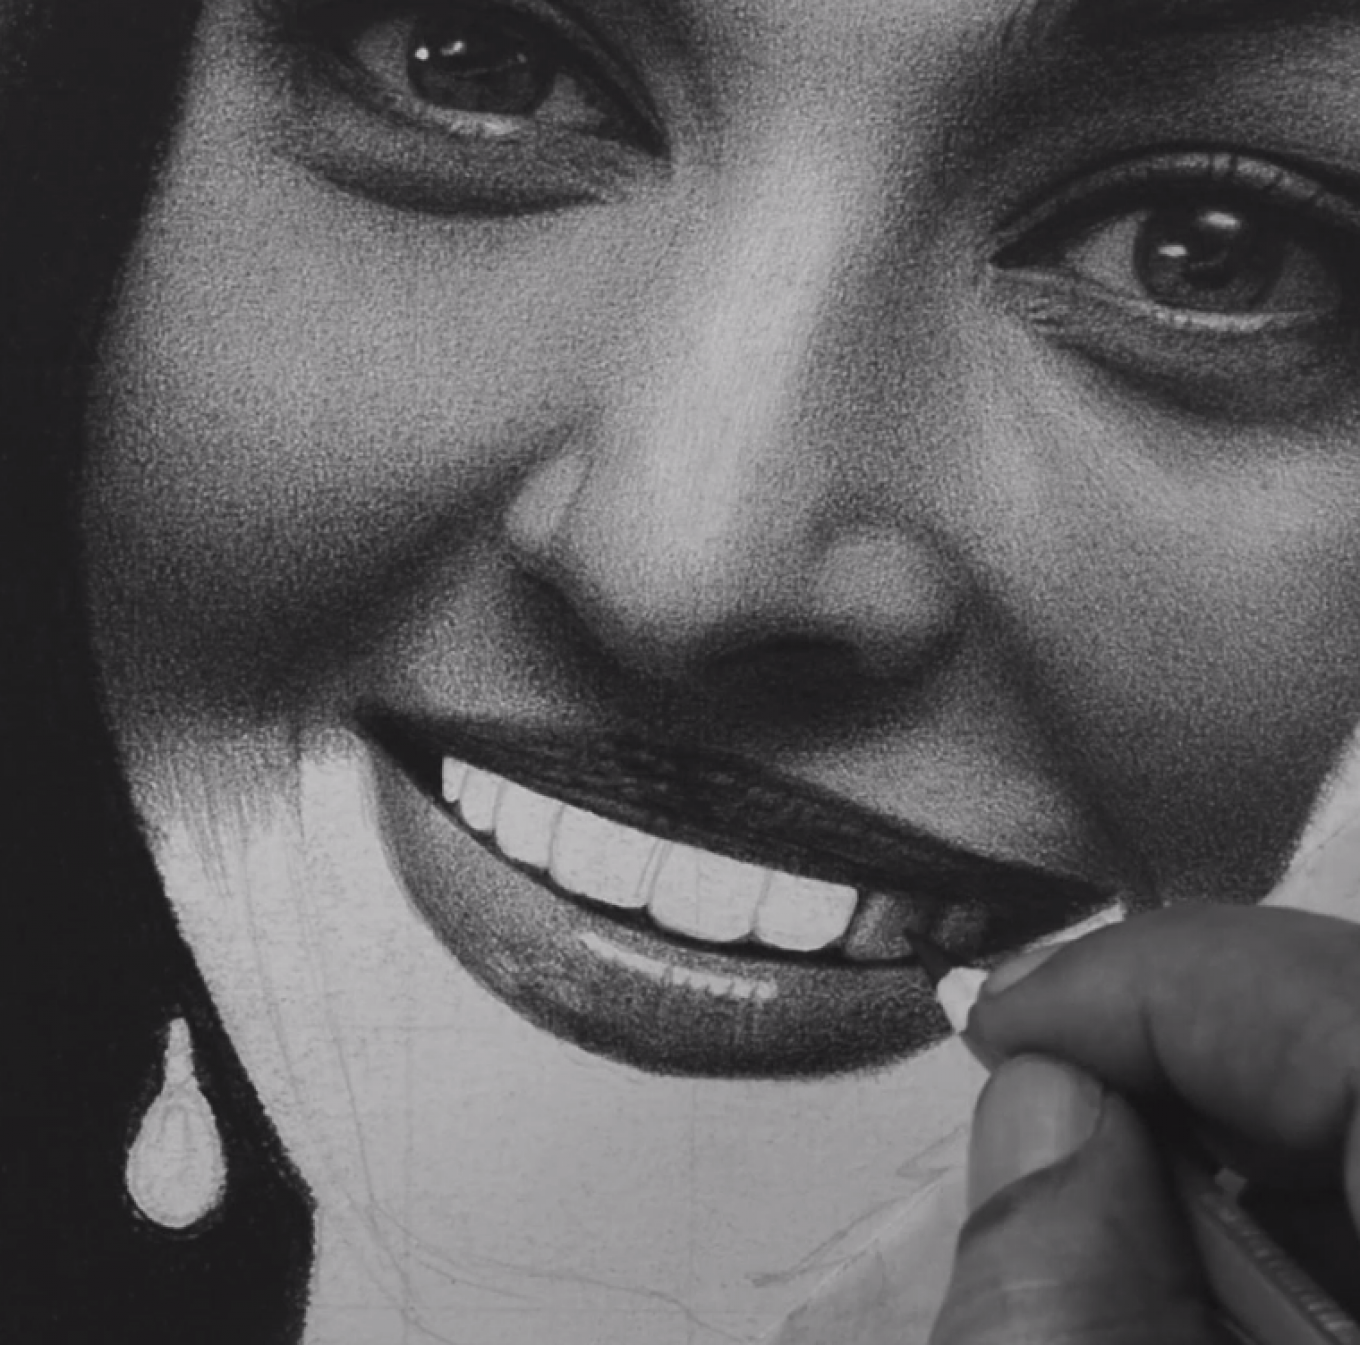 Start your Pencil Portrait with a Light Sketch